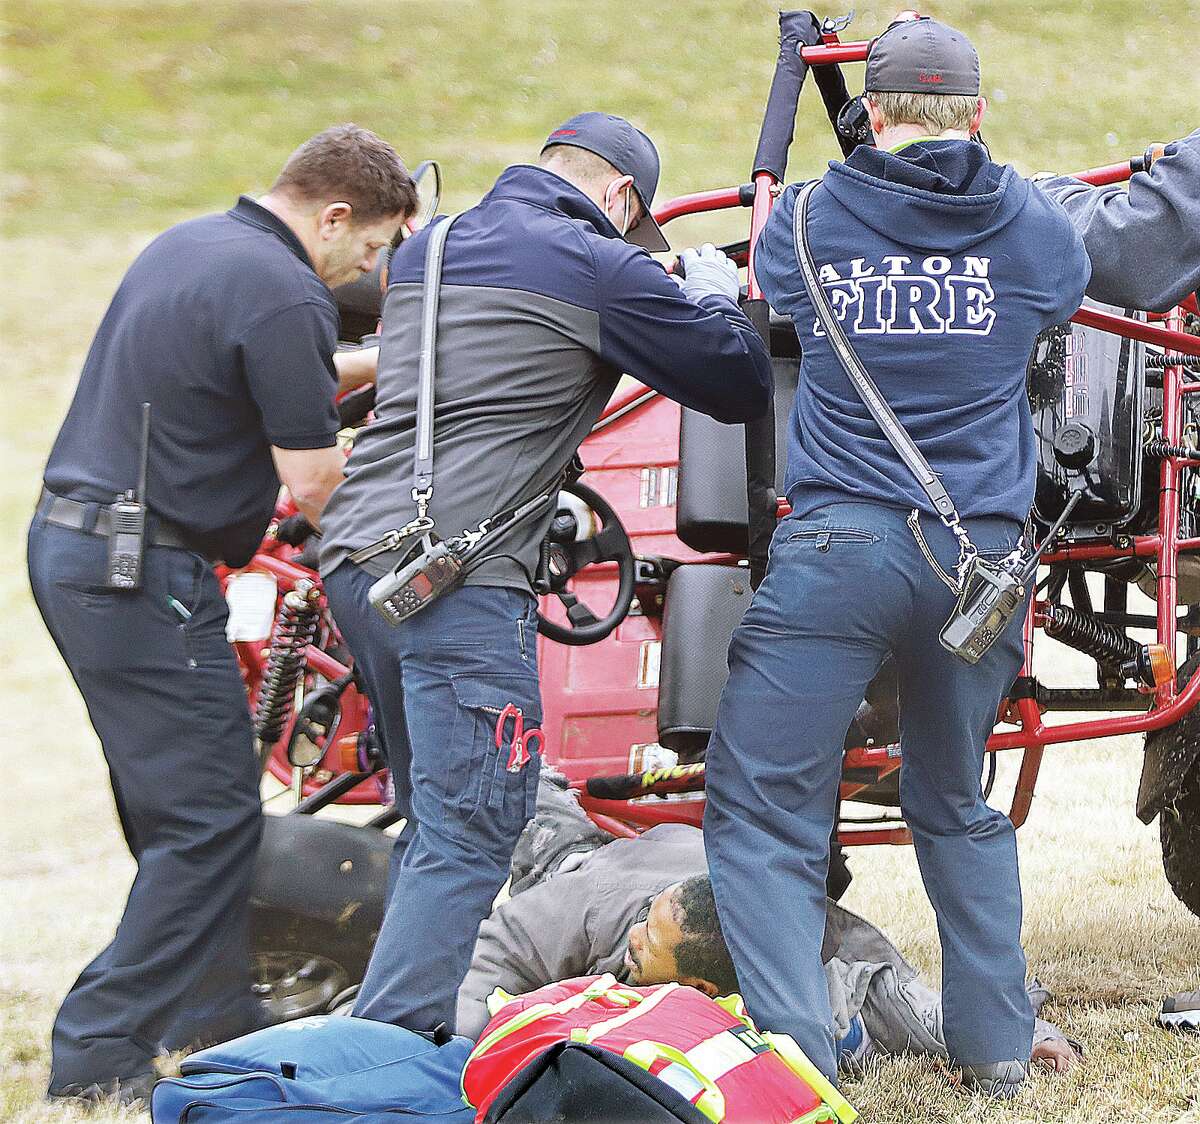 John Badman|The Telegraph Alton firefighters push a four-wheeler back onto its wheels to free the man Wednesday in Norside Park.